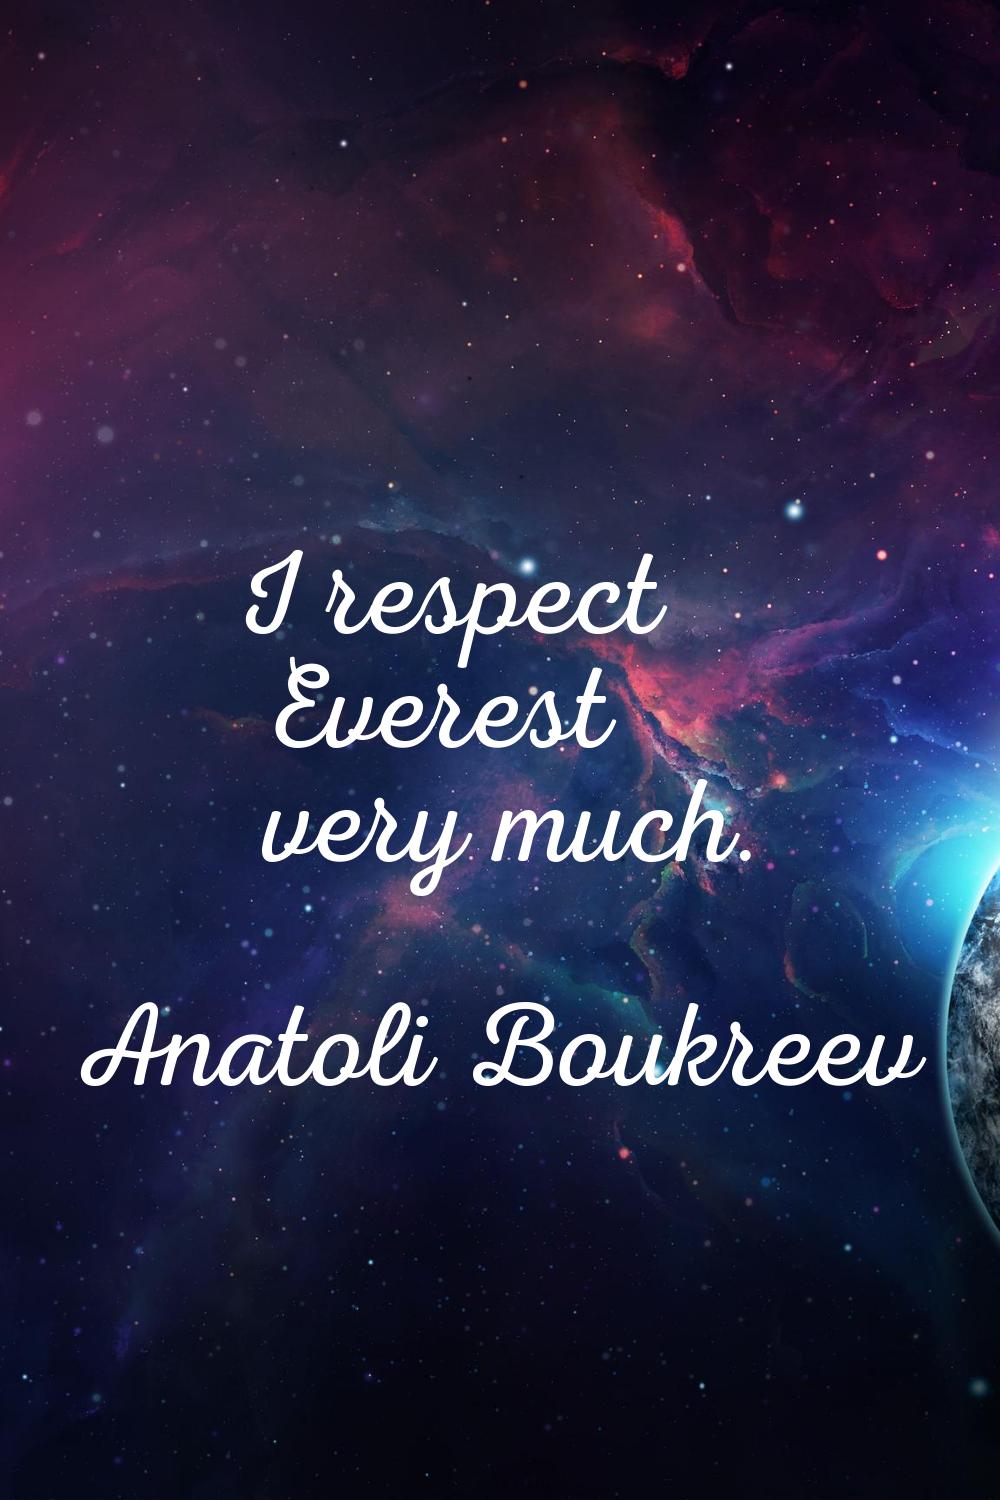 I respect Everest very much.